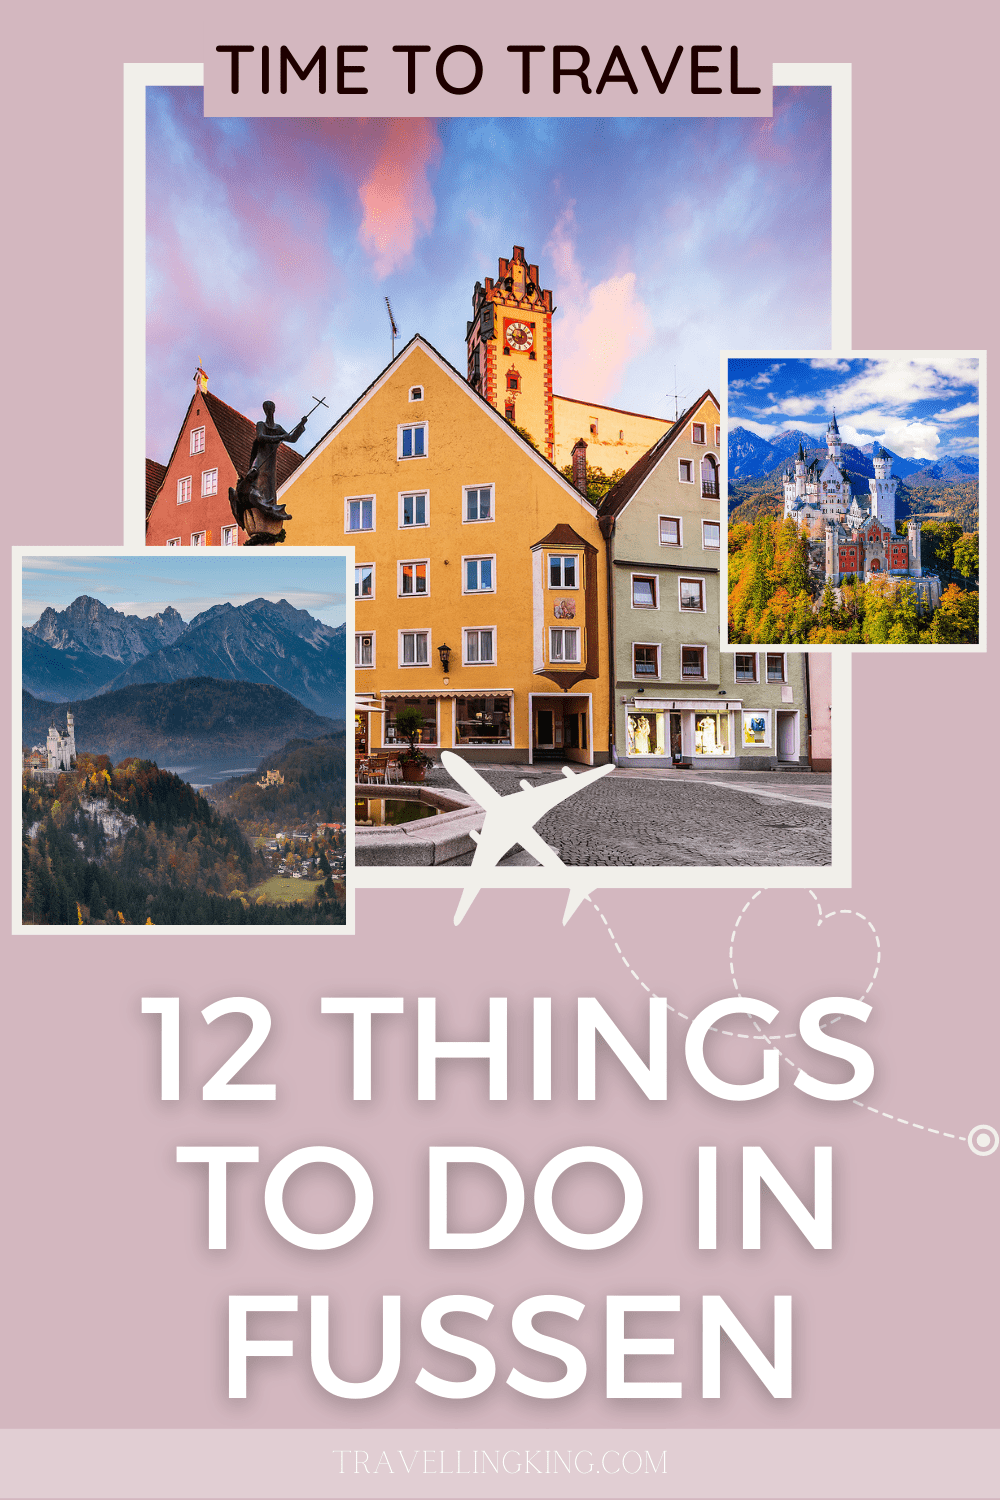 12 Things to do in Fussen